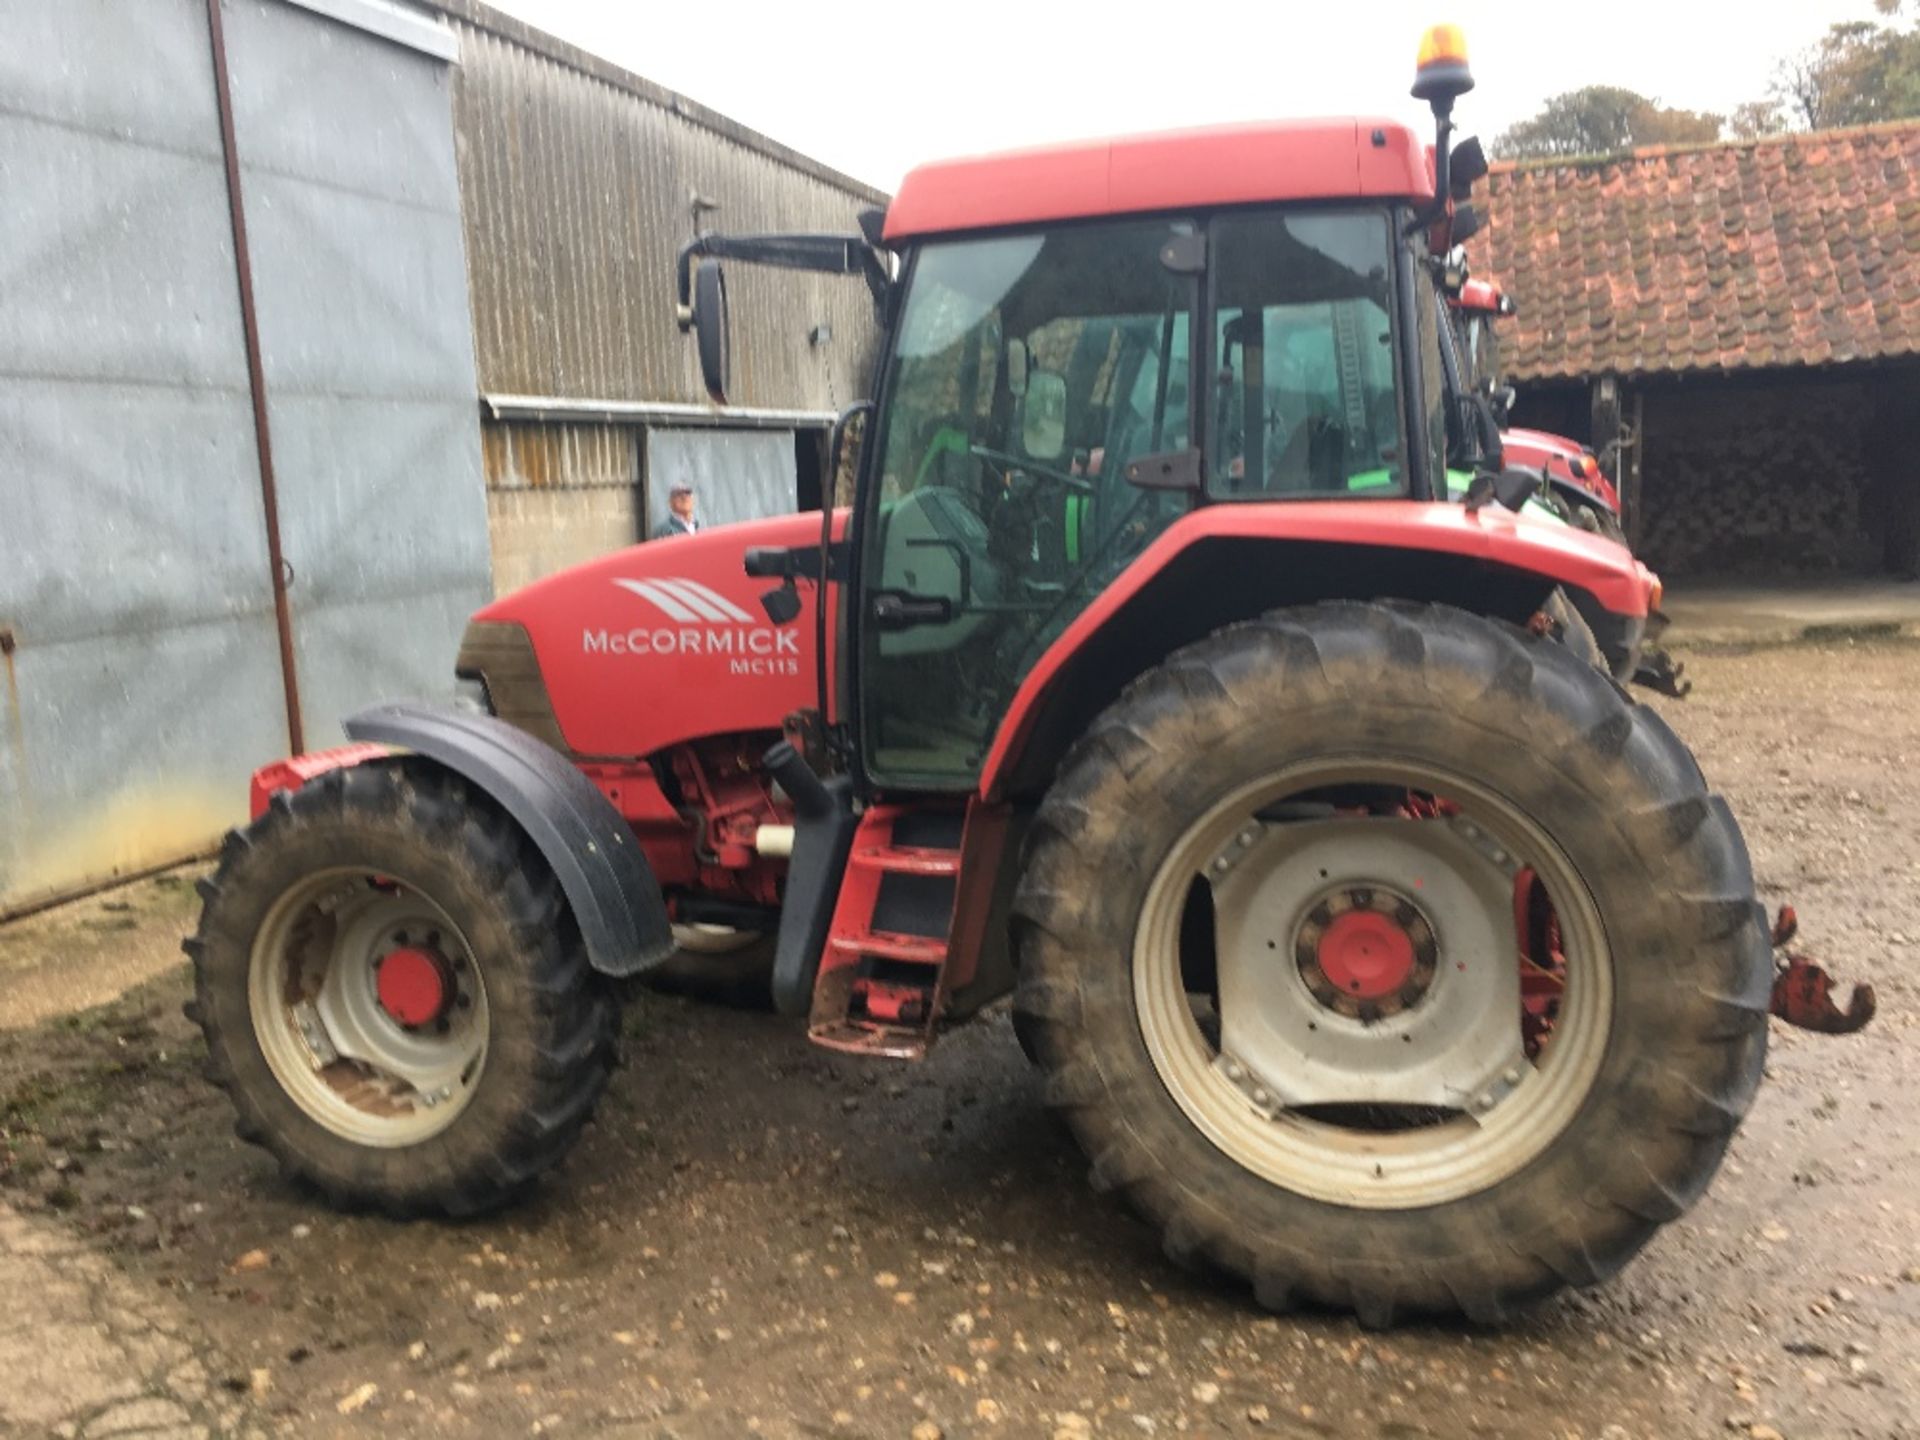 2003 McCormick MC115 tractor, front wafer weights, Rear Tyres: 12.4 R46, Front Tyres: 270/95 R32. - Image 3 of 4